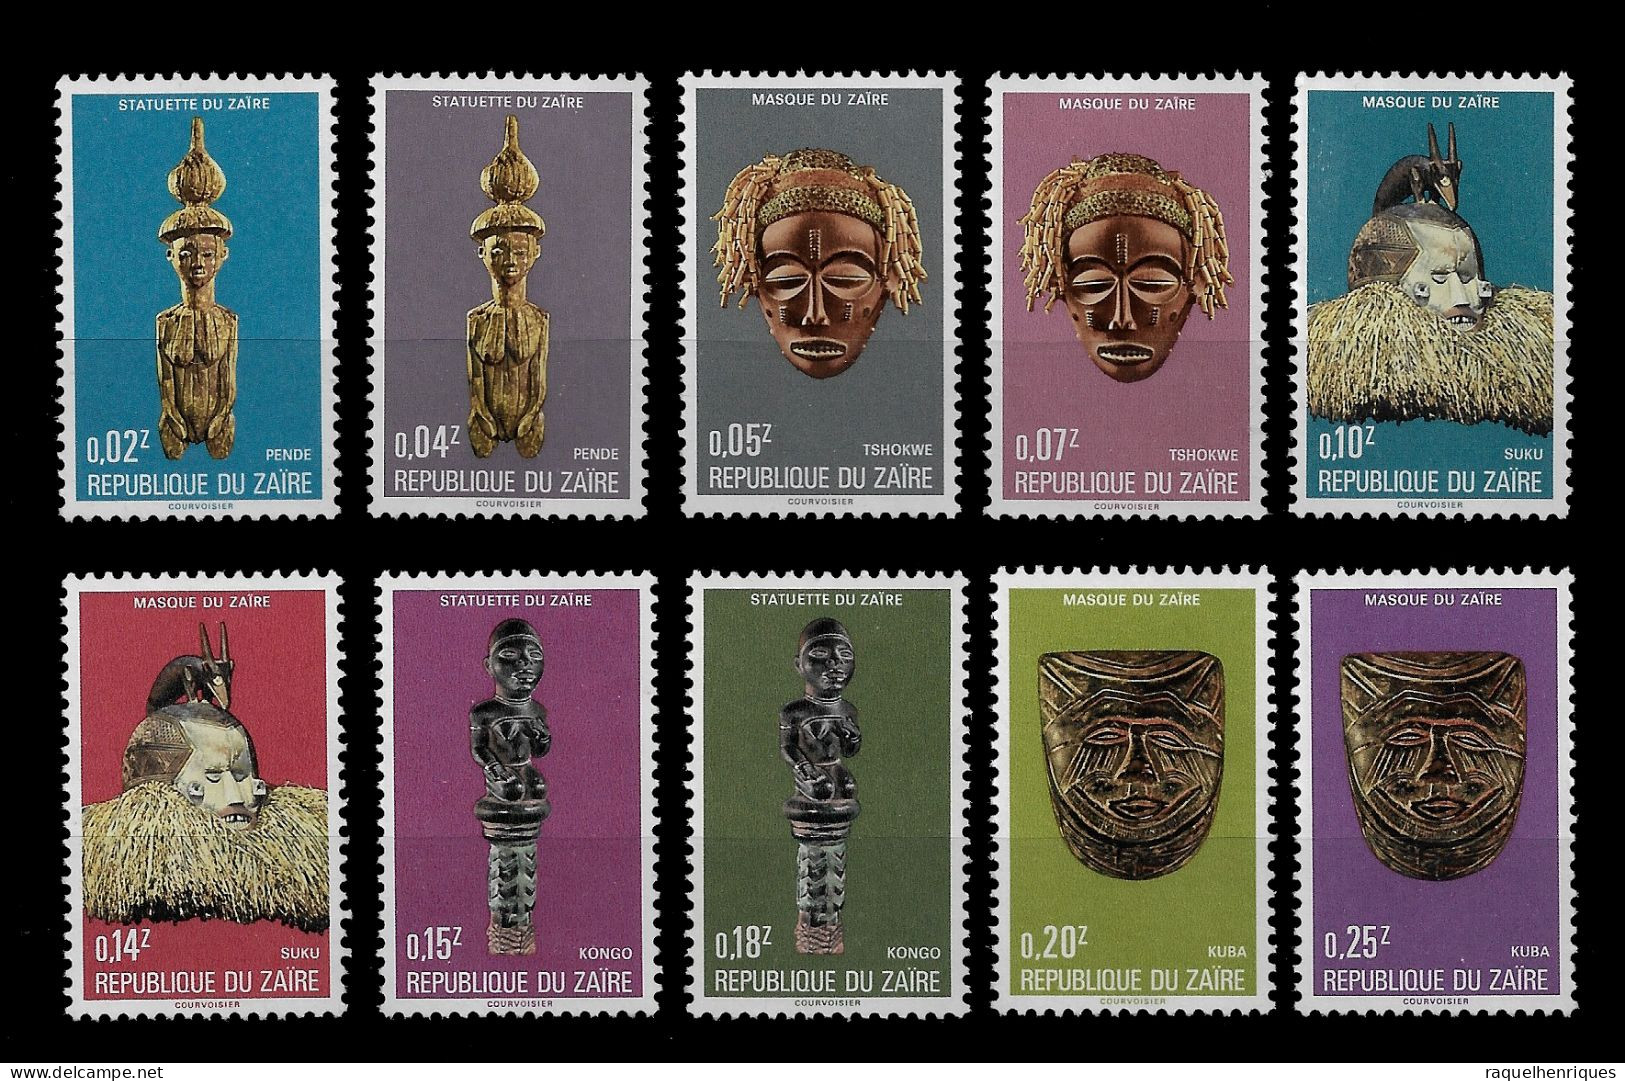 CONGO ZAIRE STAMP - 1977 Masks And Statuettes SET MNH (NP#01) - Nuevos